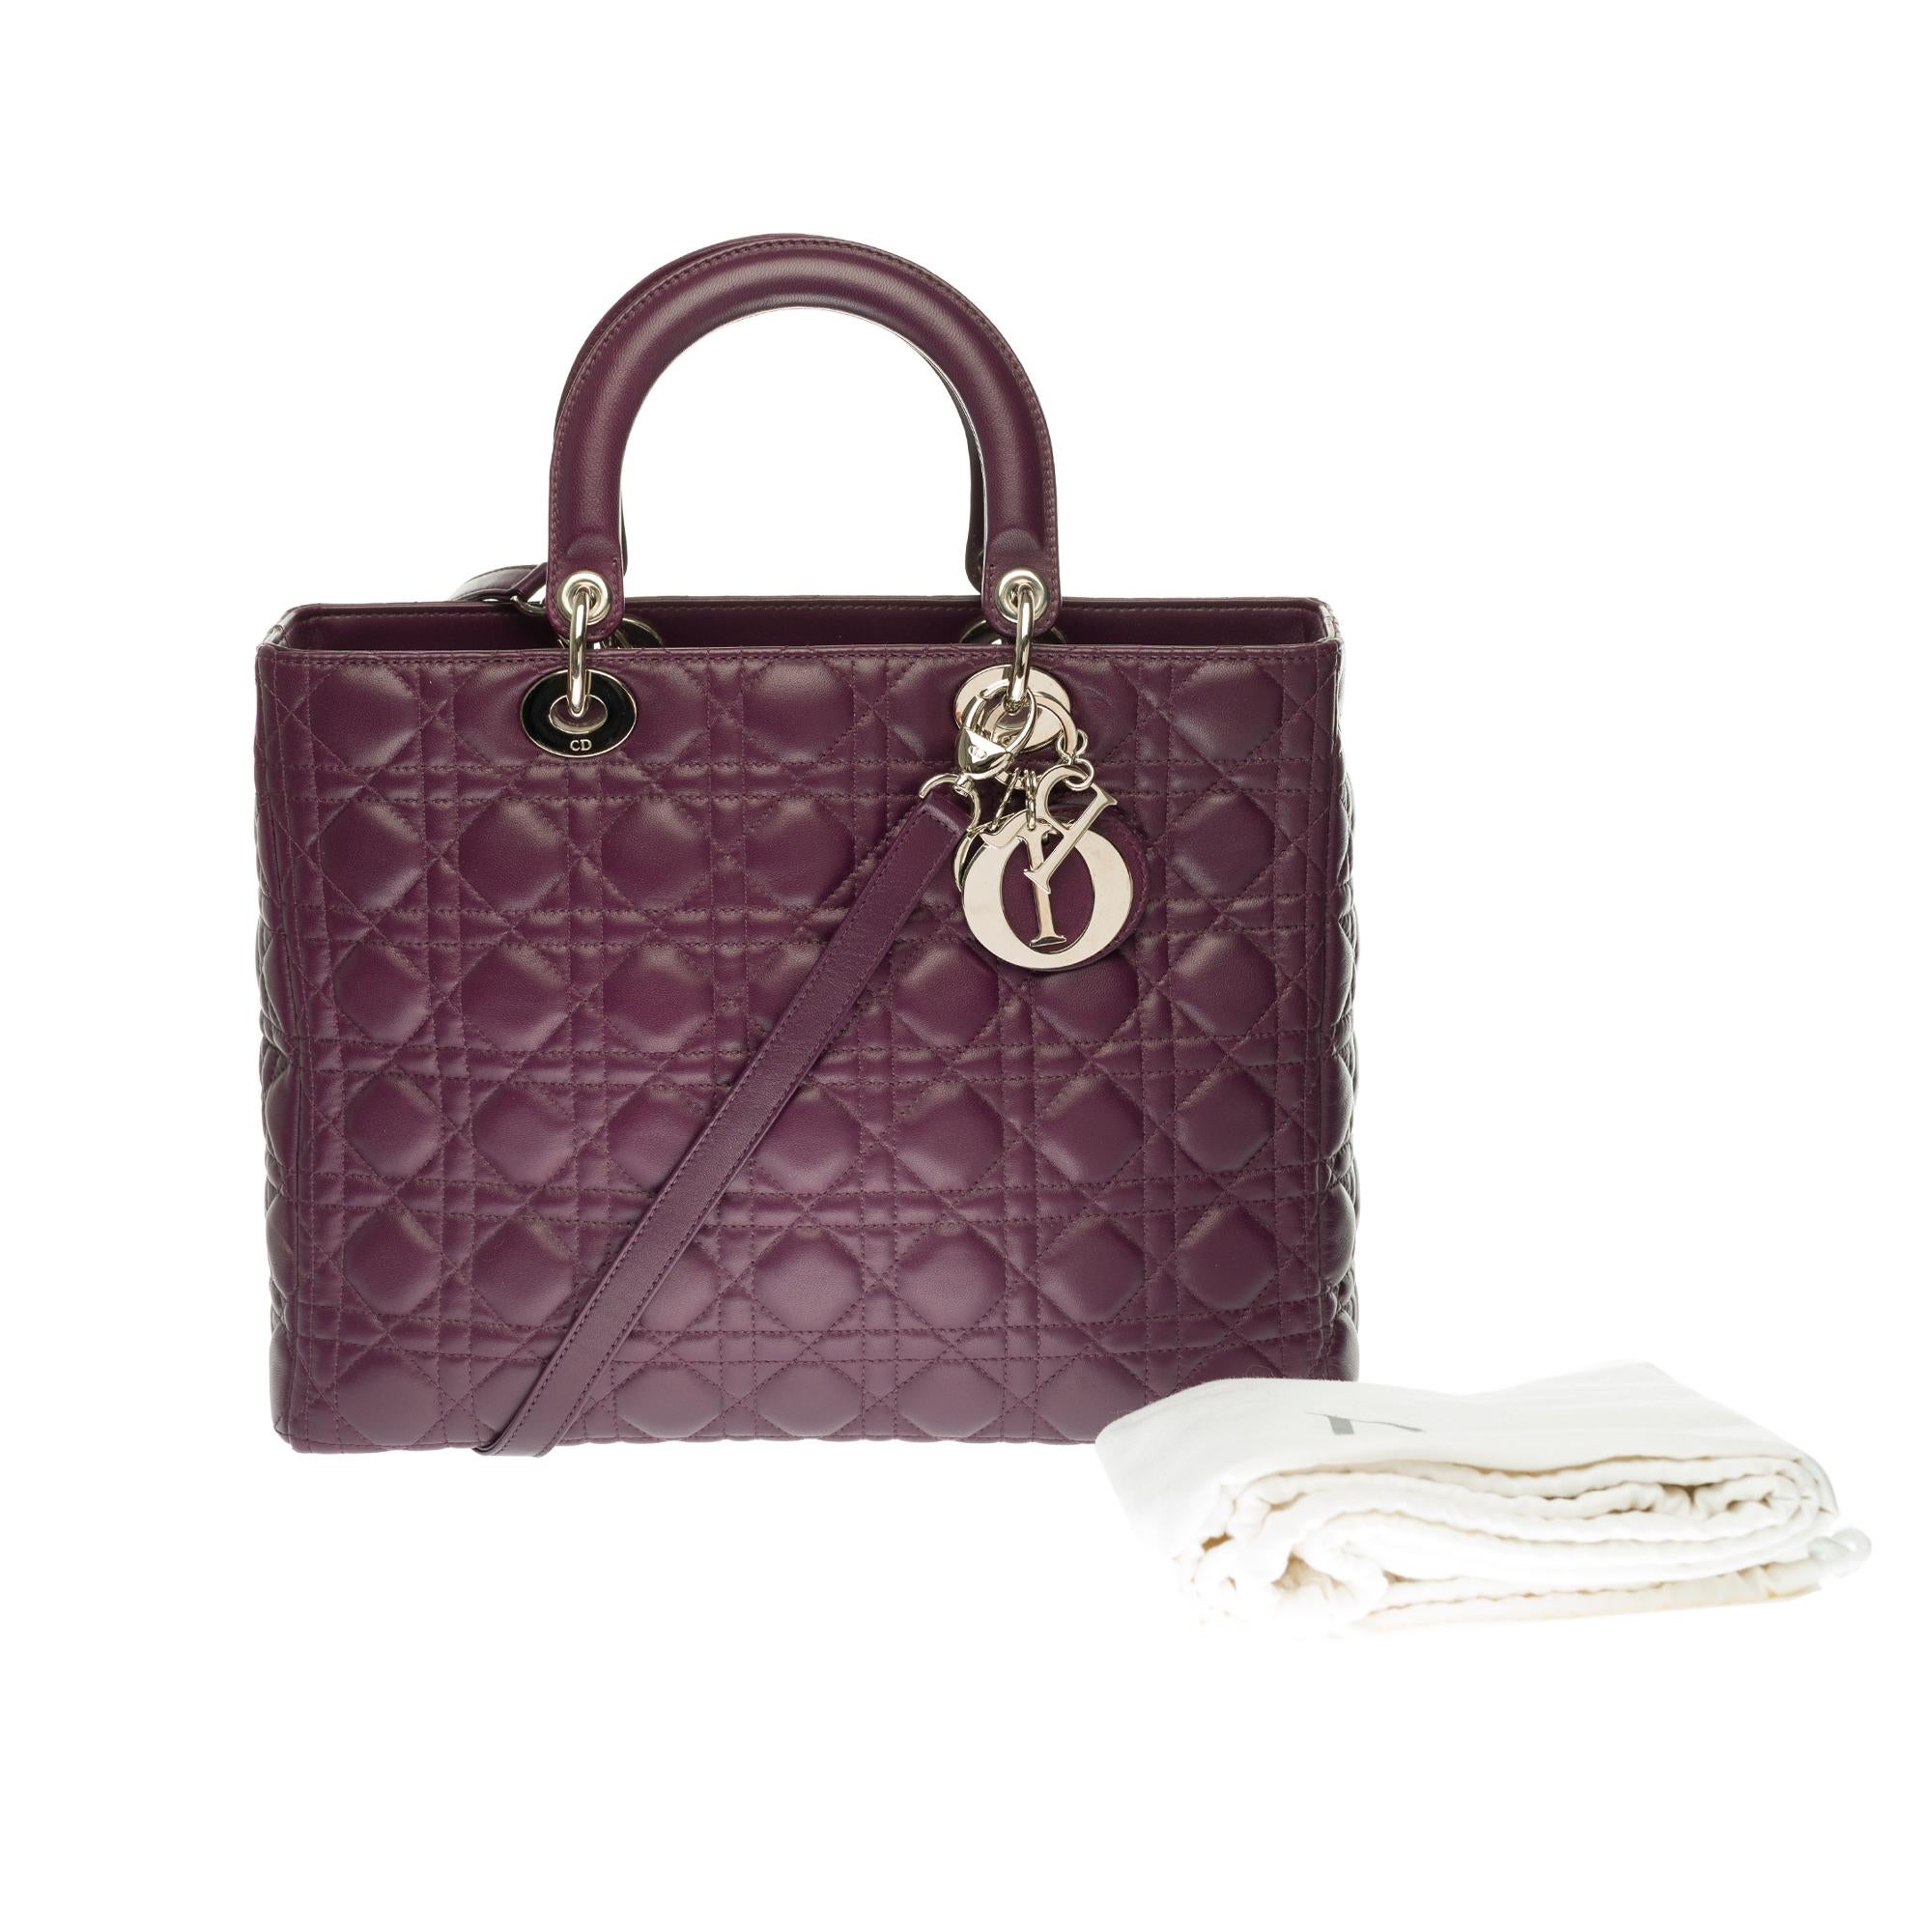  Lady Dior GM ( large model) shoulder bag with strap in purple cannage, SHW 3